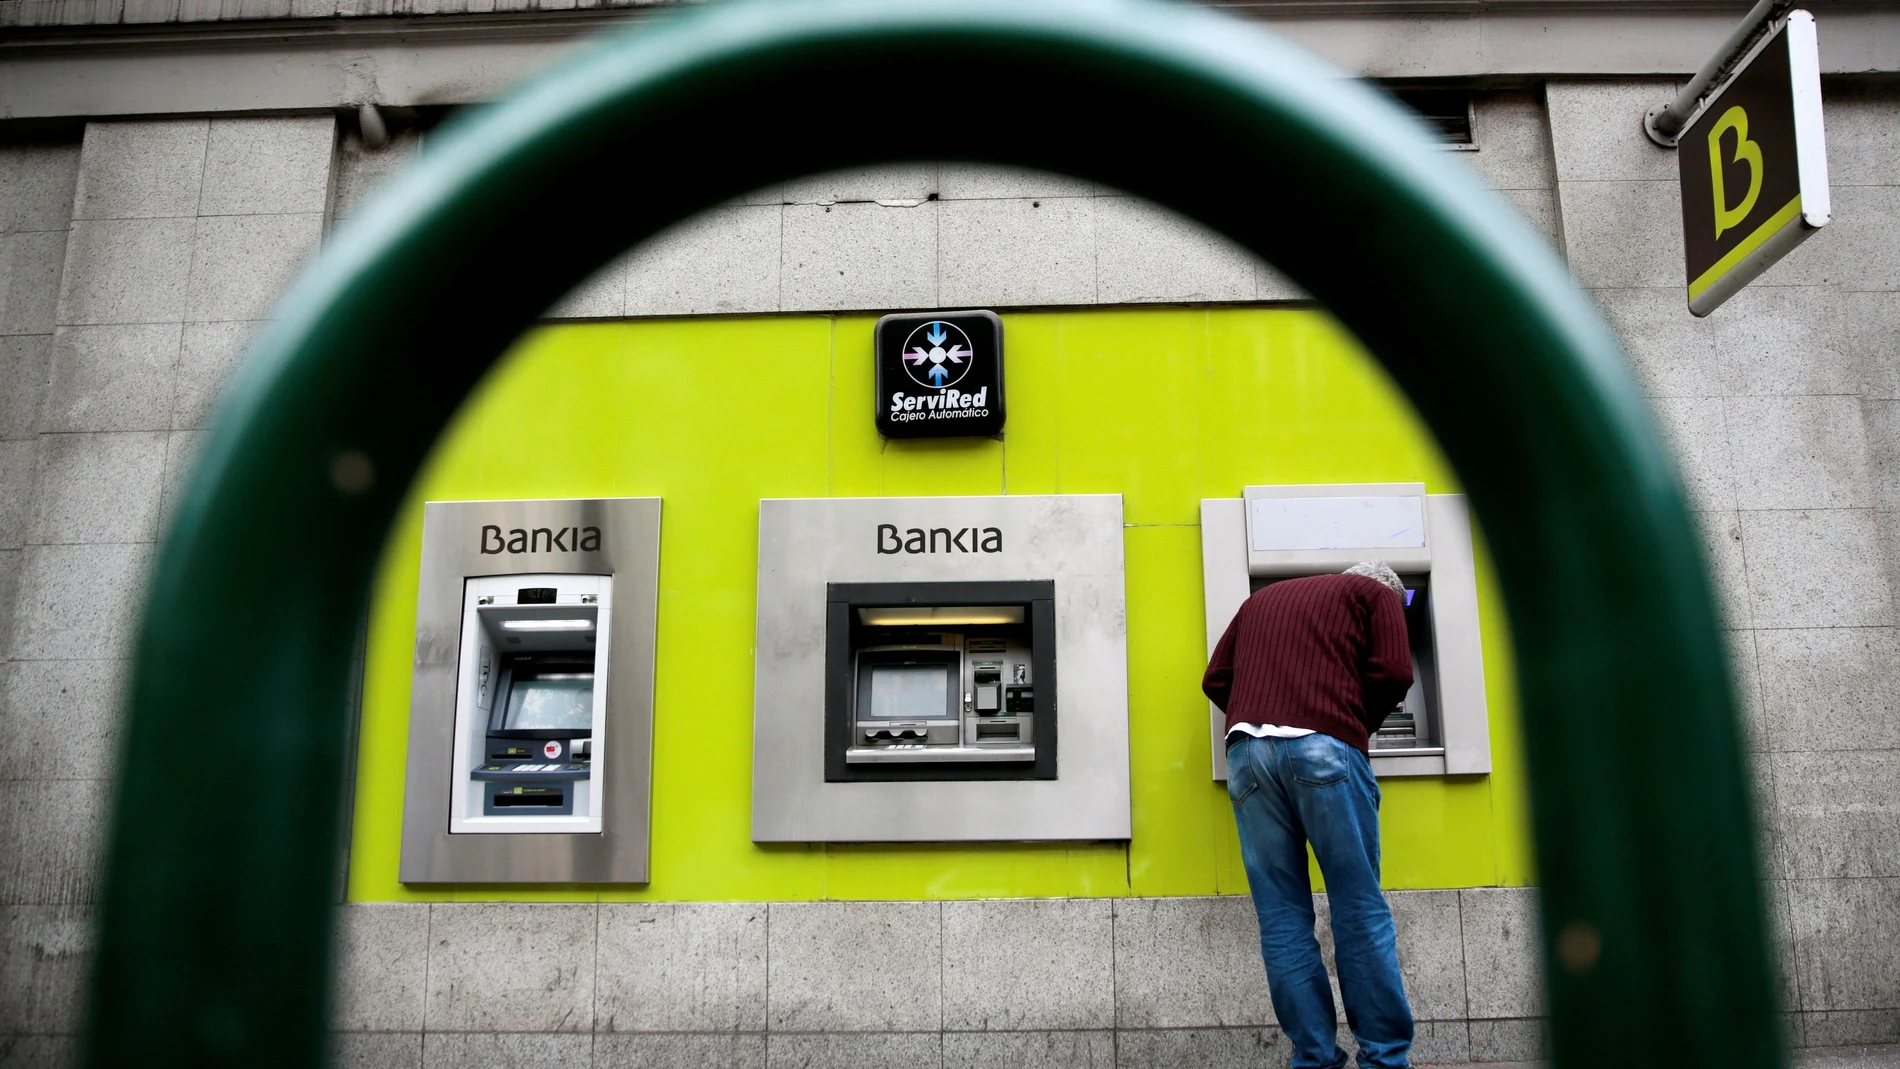 FILE PHOTO: A man uses a cash dispenser at a Bankia branch in Madrid